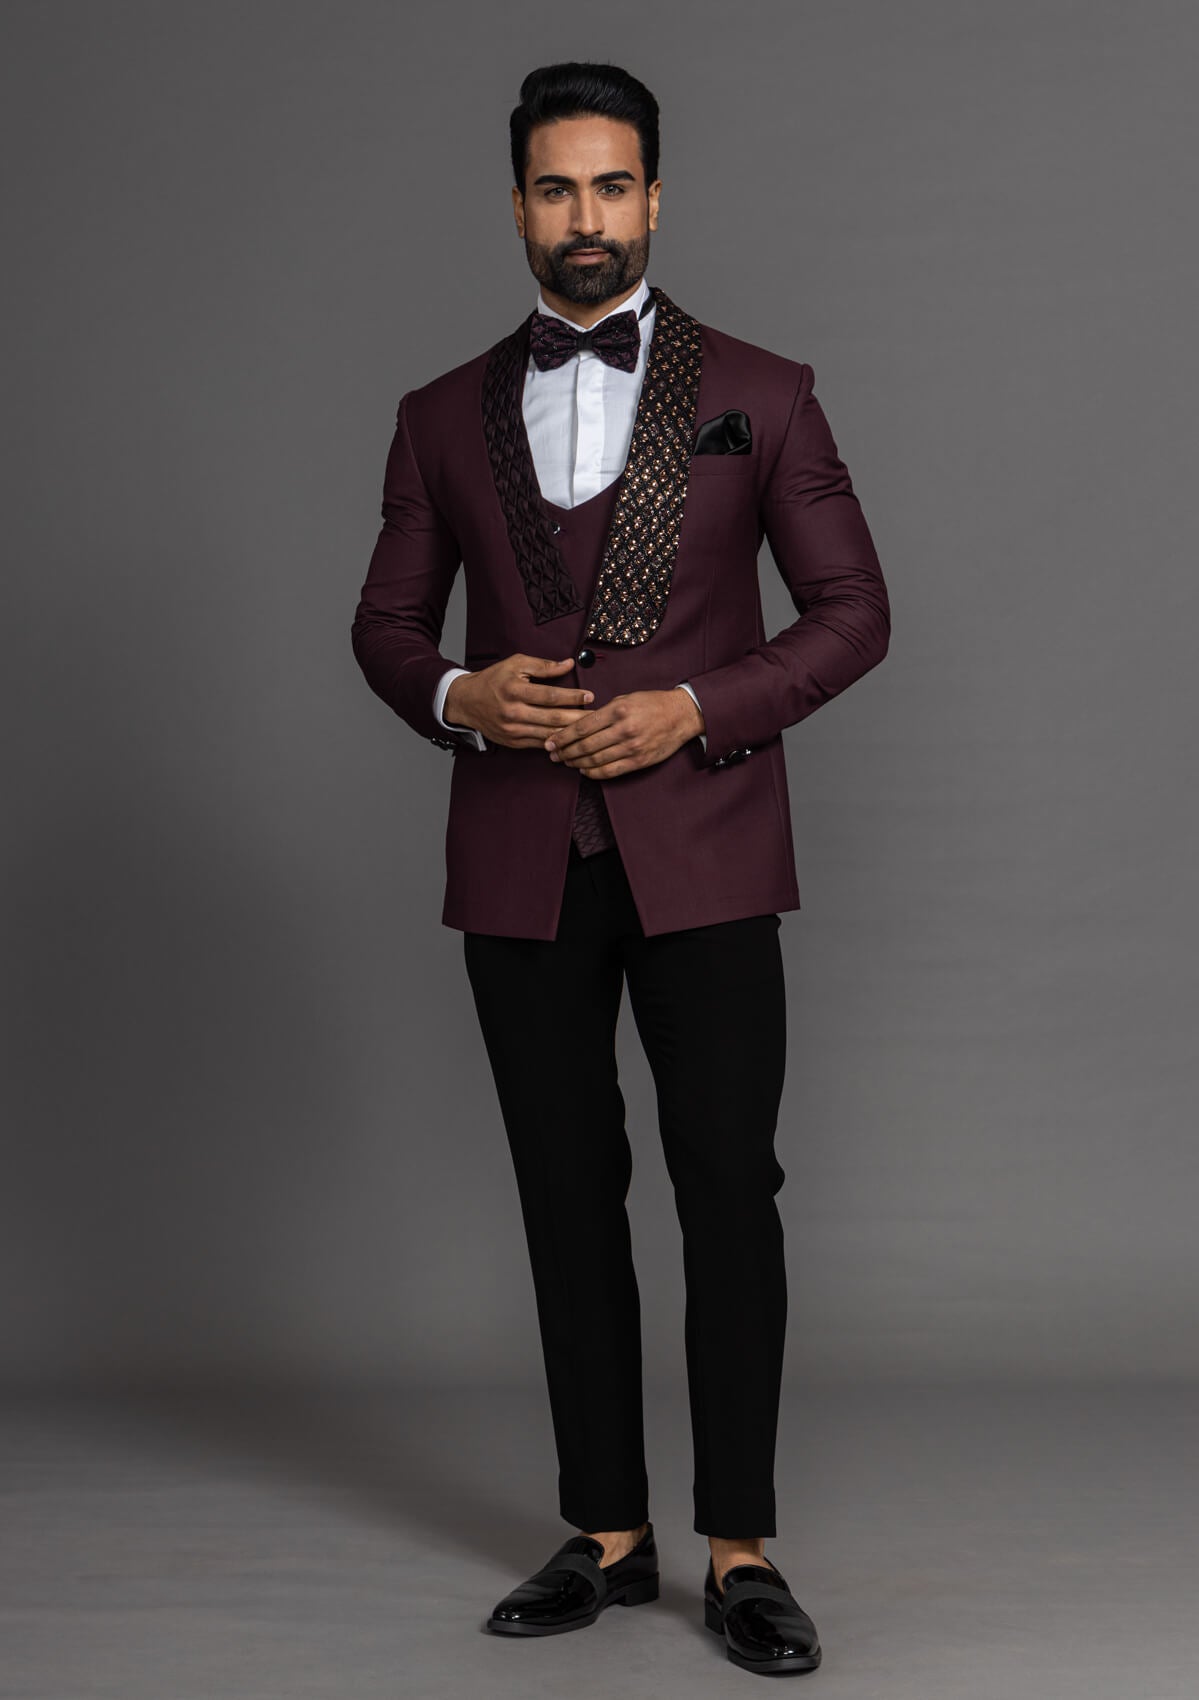 AMIAS suit ensemble for a timeless and polished look